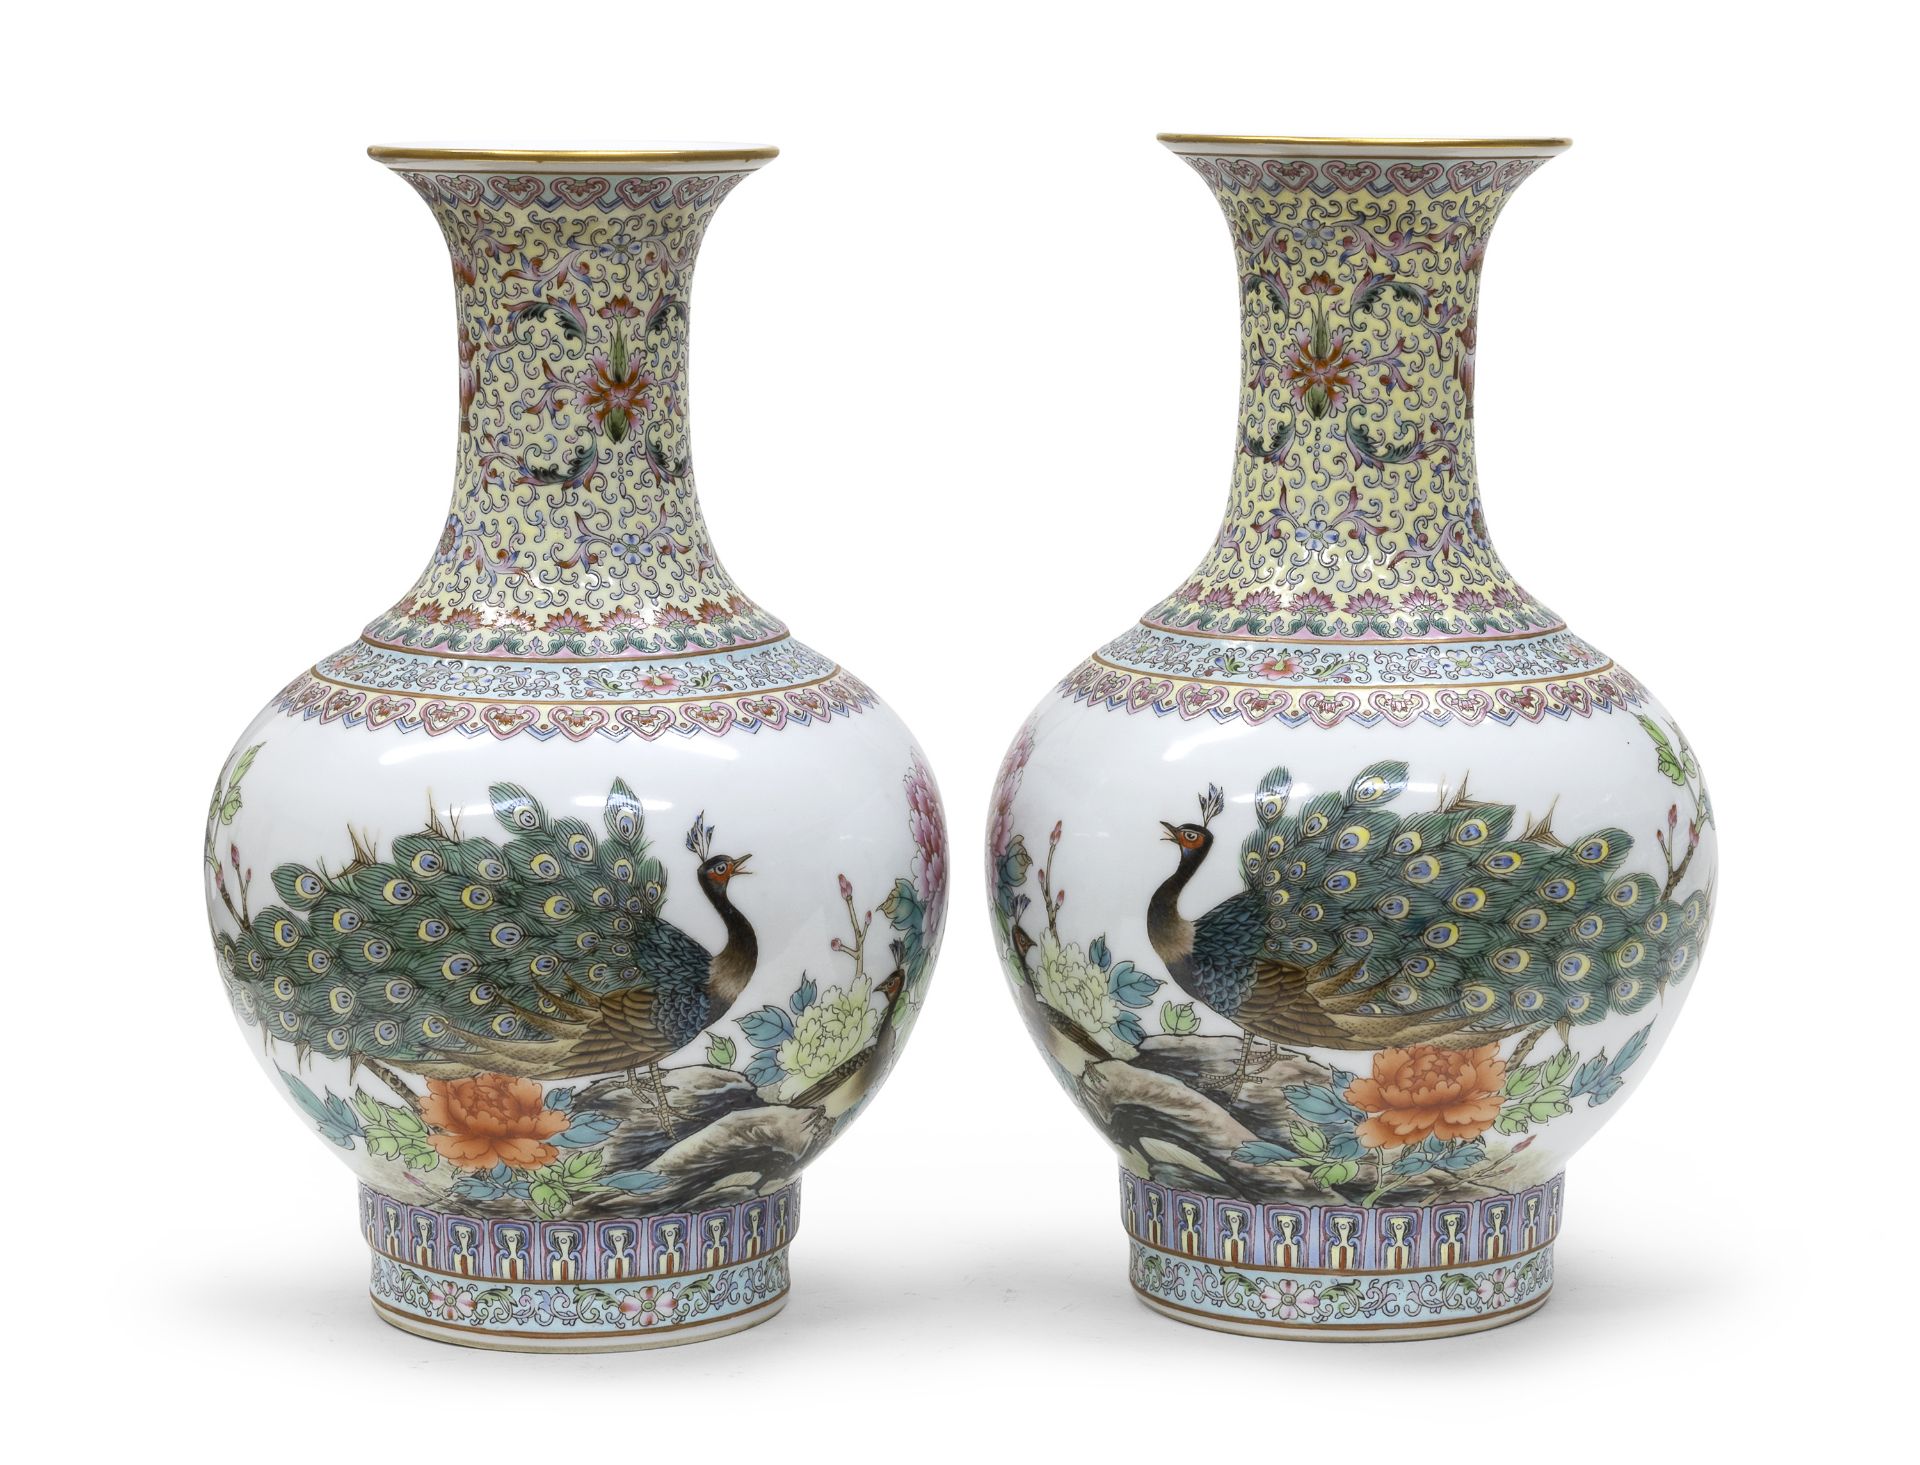 A PAIR OF CHINESE POLYCHROME ENAMELED PORCELAIN VASES 20TH CENTURY.